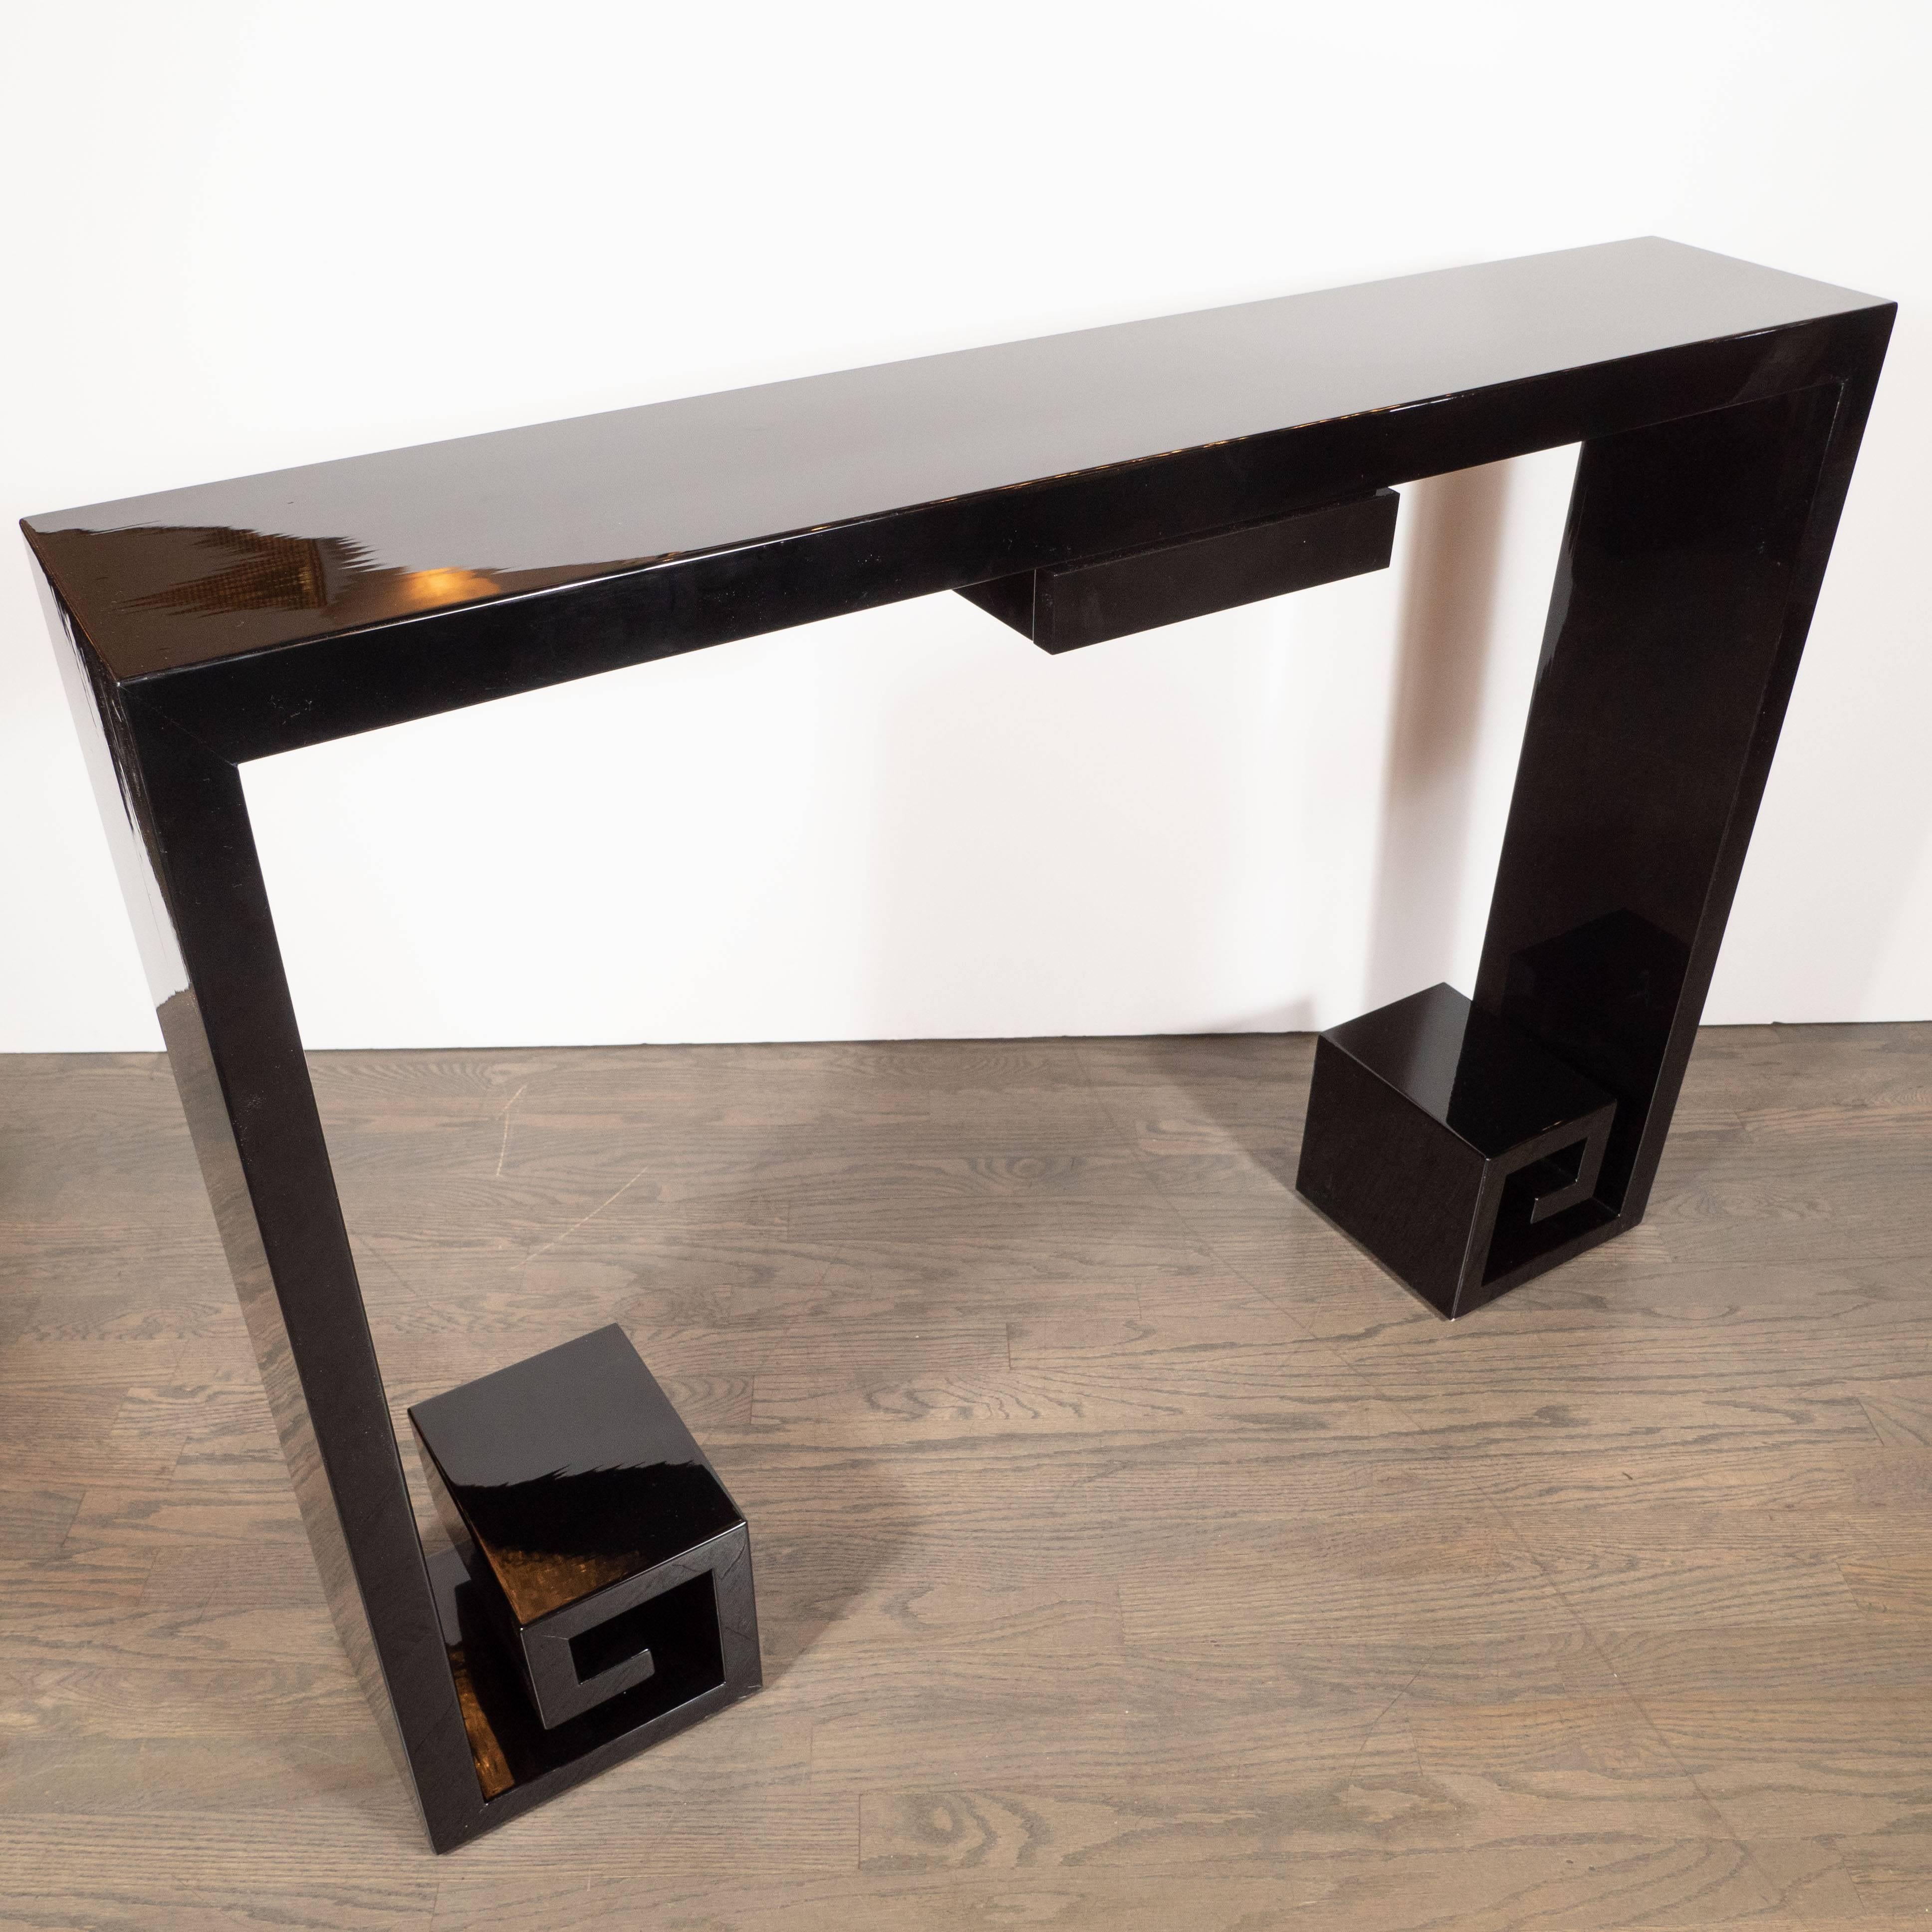 Wood Custom Modernist Black Lacquer Console with Greek Key Detailing & Centre Drawer